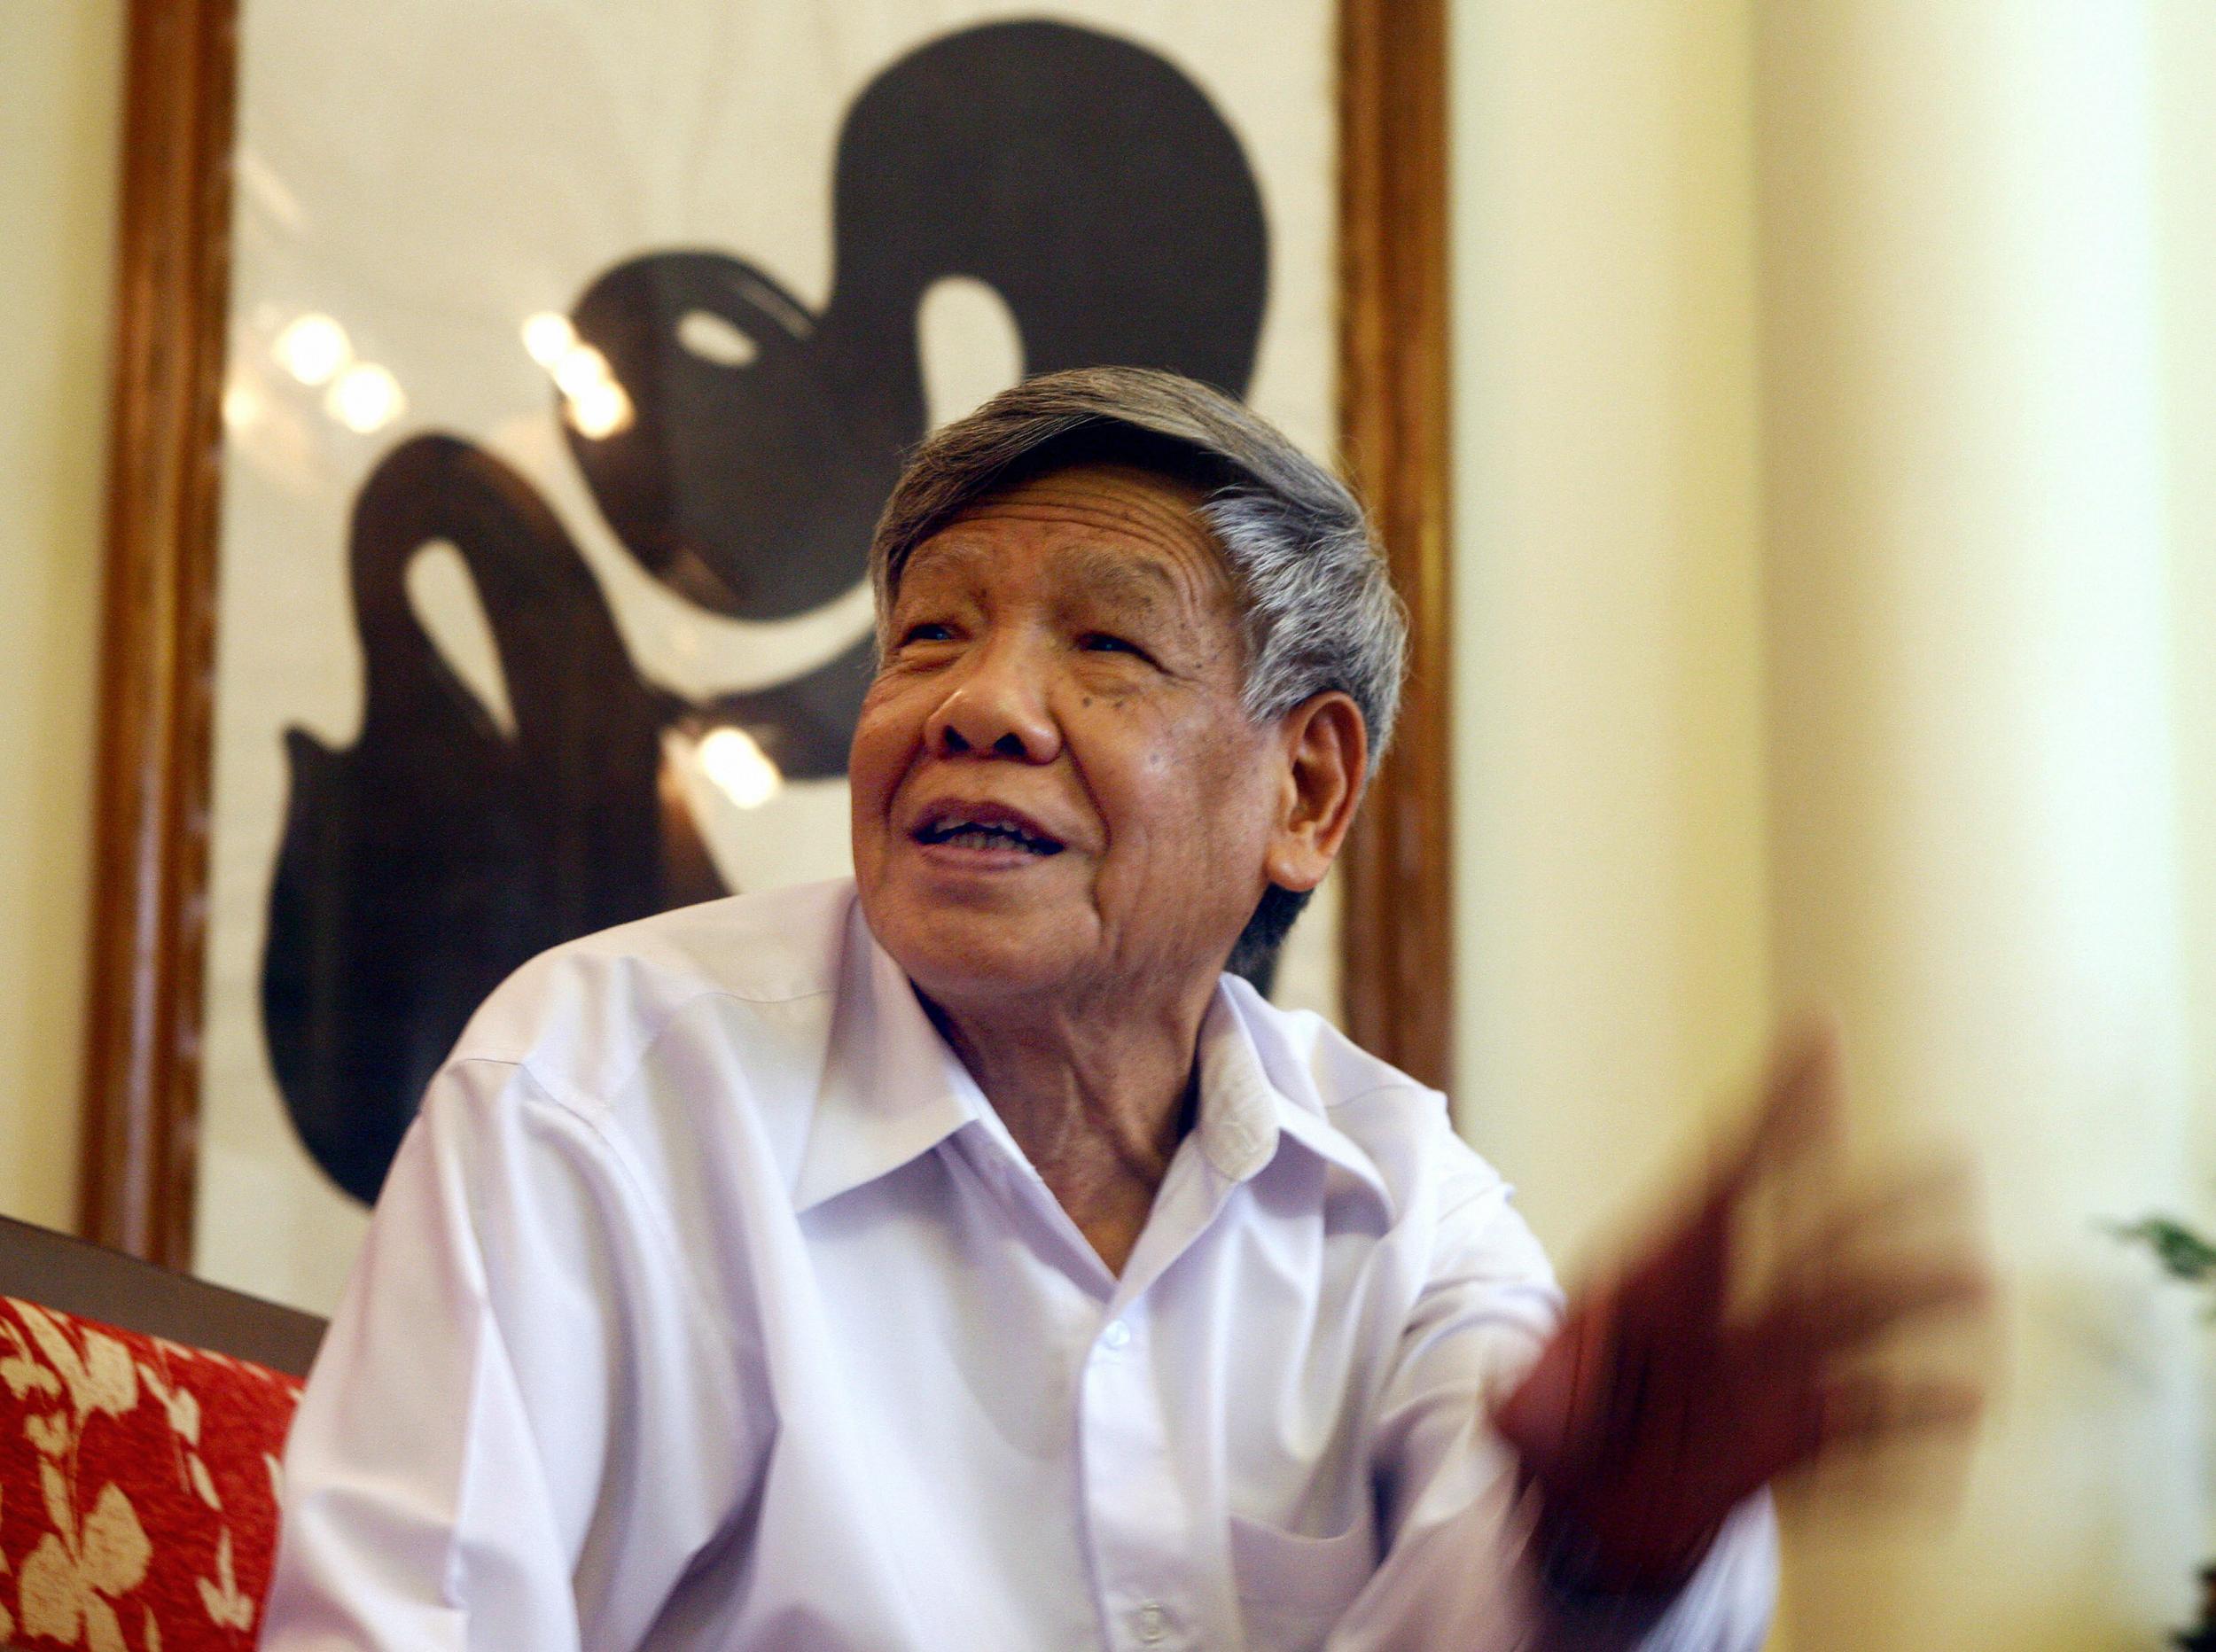 The former general secretary at his home in Hanoi in 2009